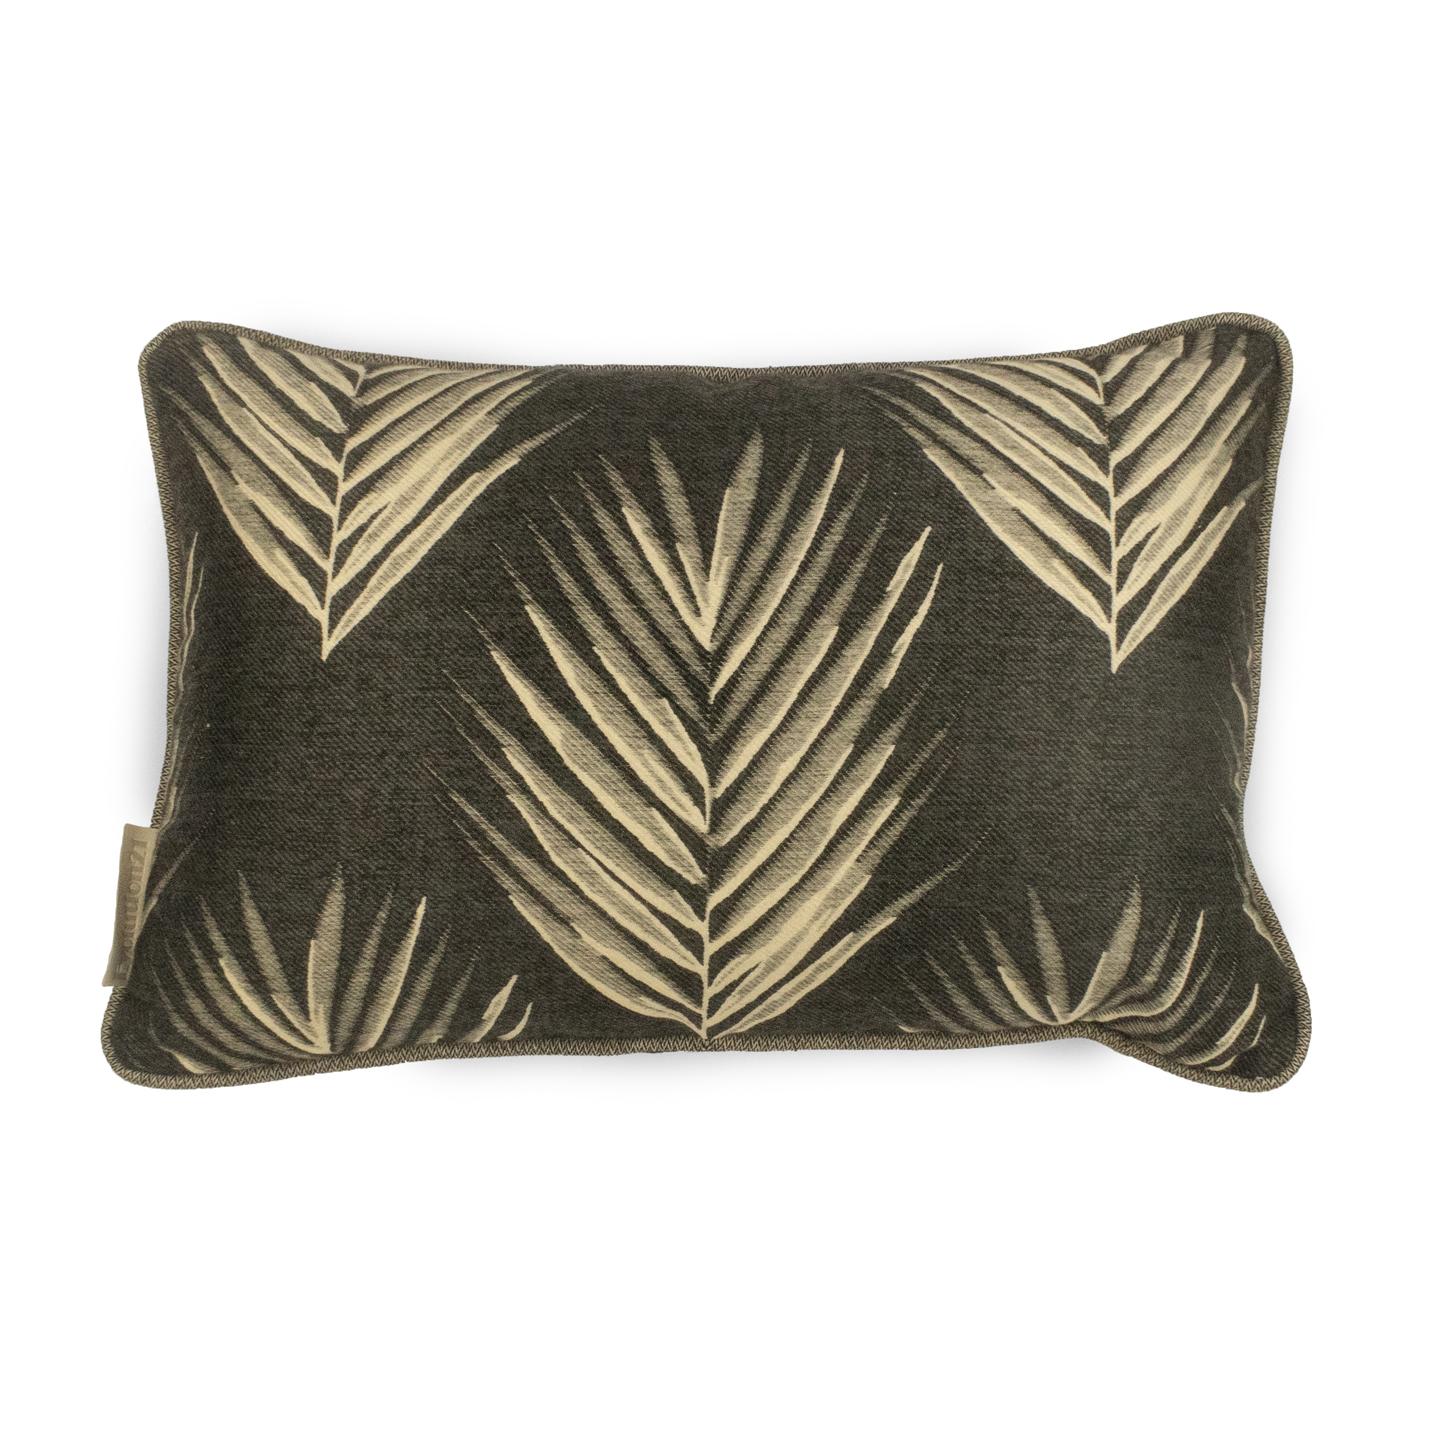 Modern Cushion / Pillow Patterned Bamboo Reverse Leaf Greyblack by Evolution21 For Sale